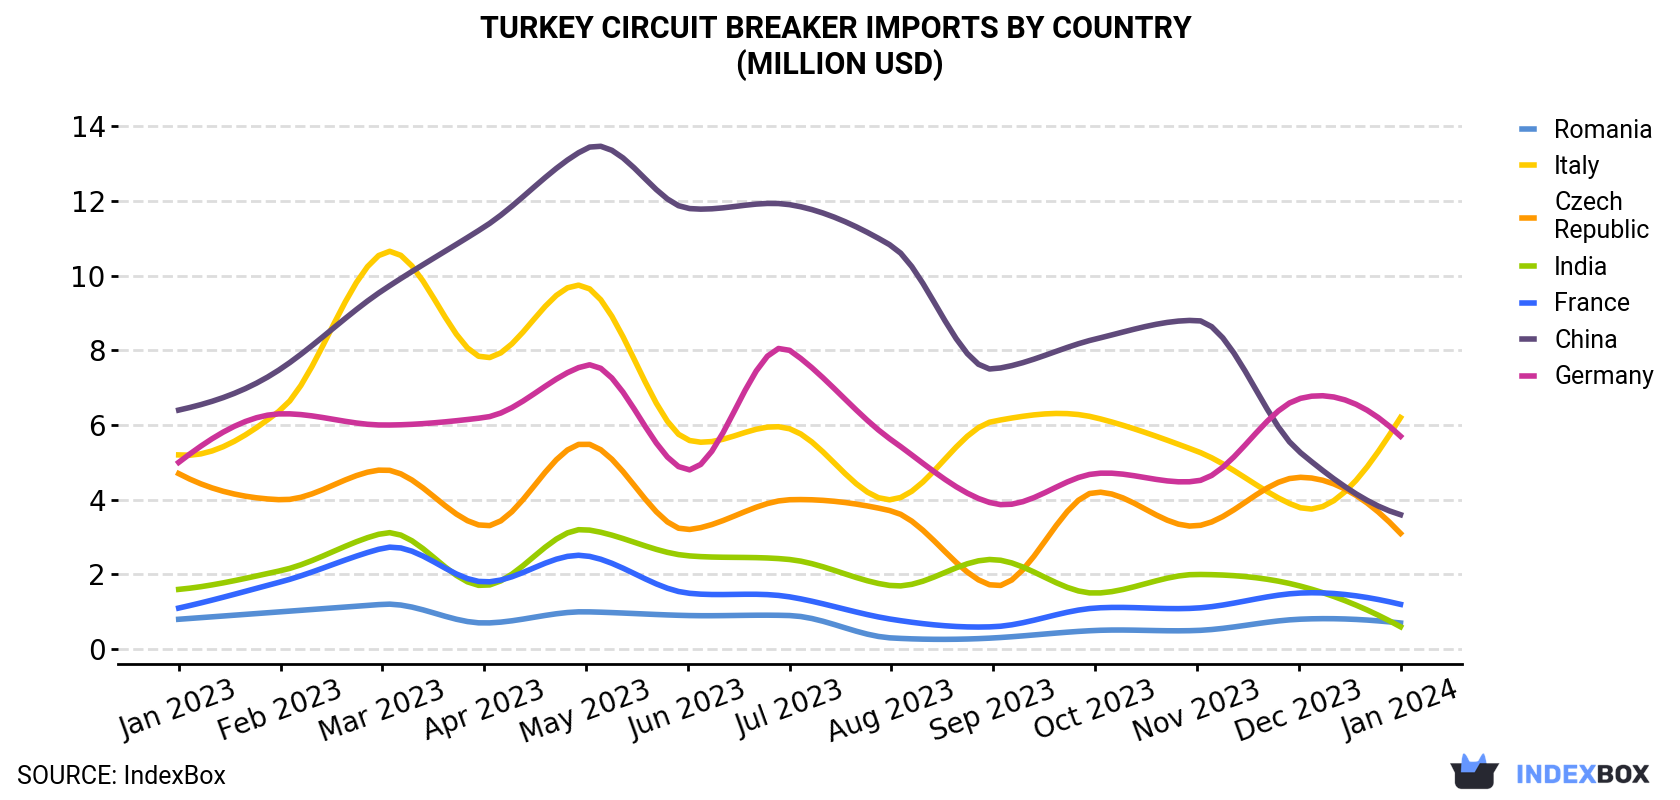 Turkey Circuit Breaker Imports By Country (Million USD)